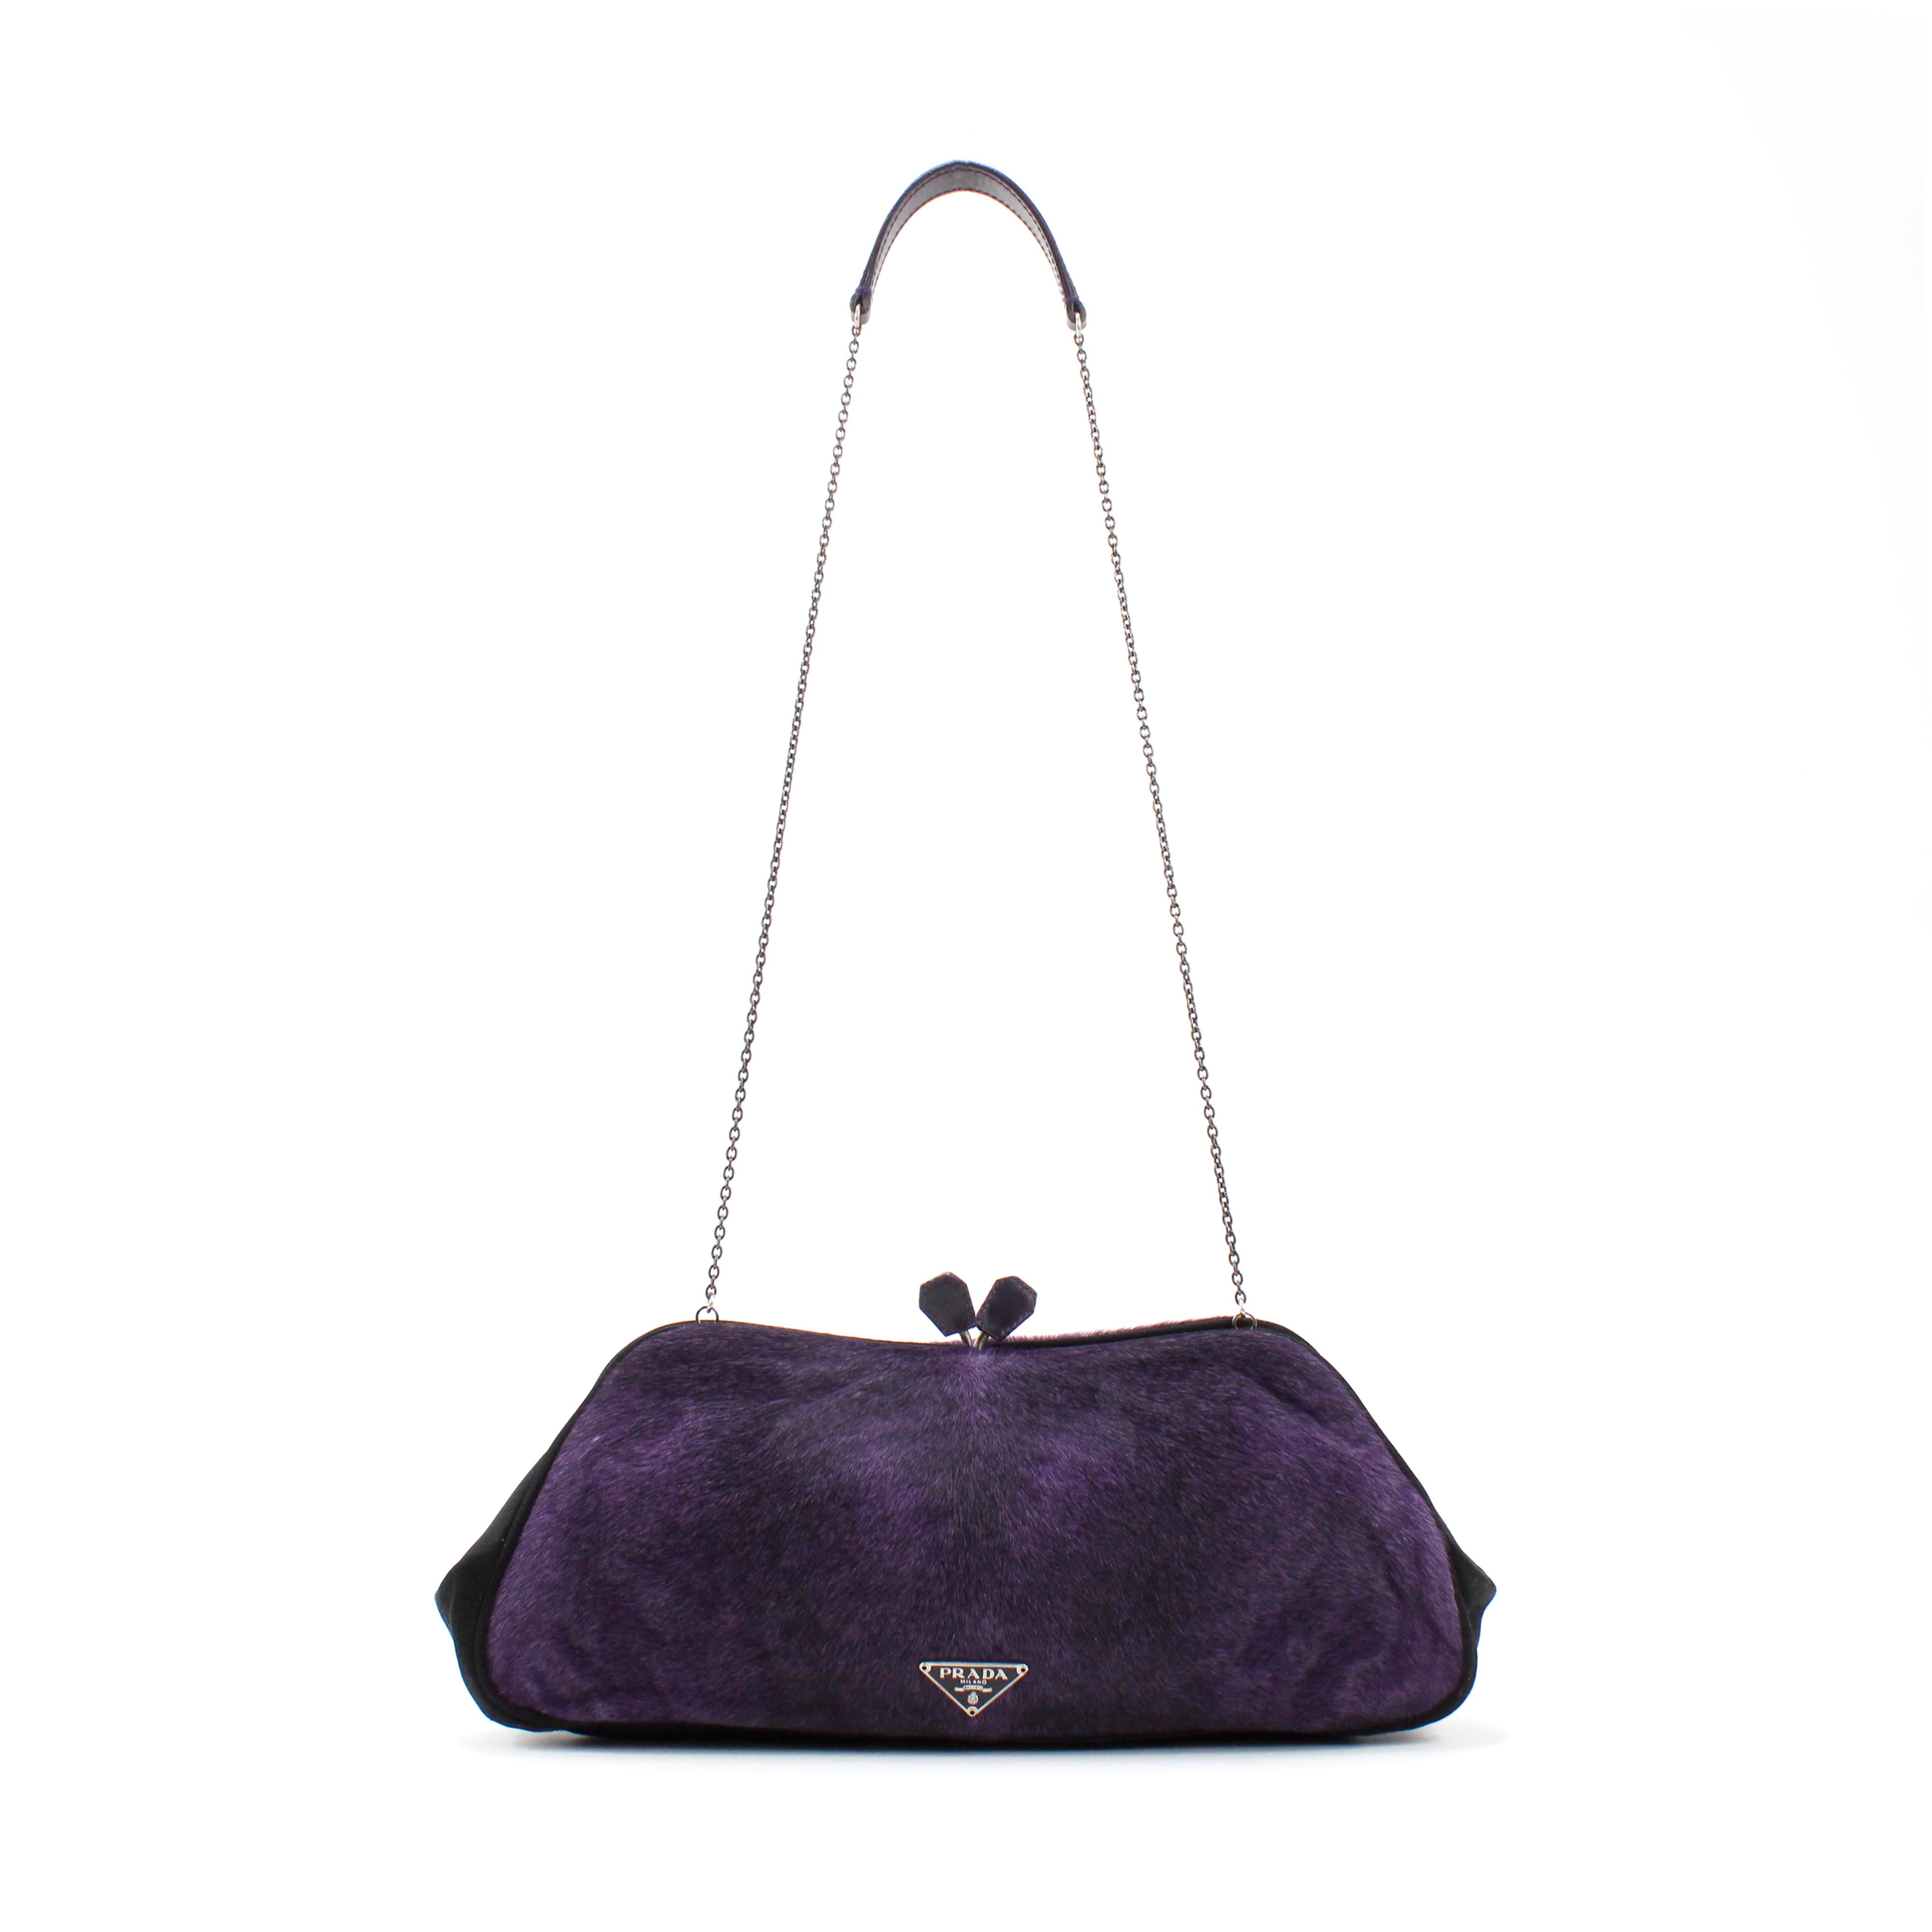 Prada Purple Pony Hair Bag  In Excellent Condition For Sale In Bressanone, IT